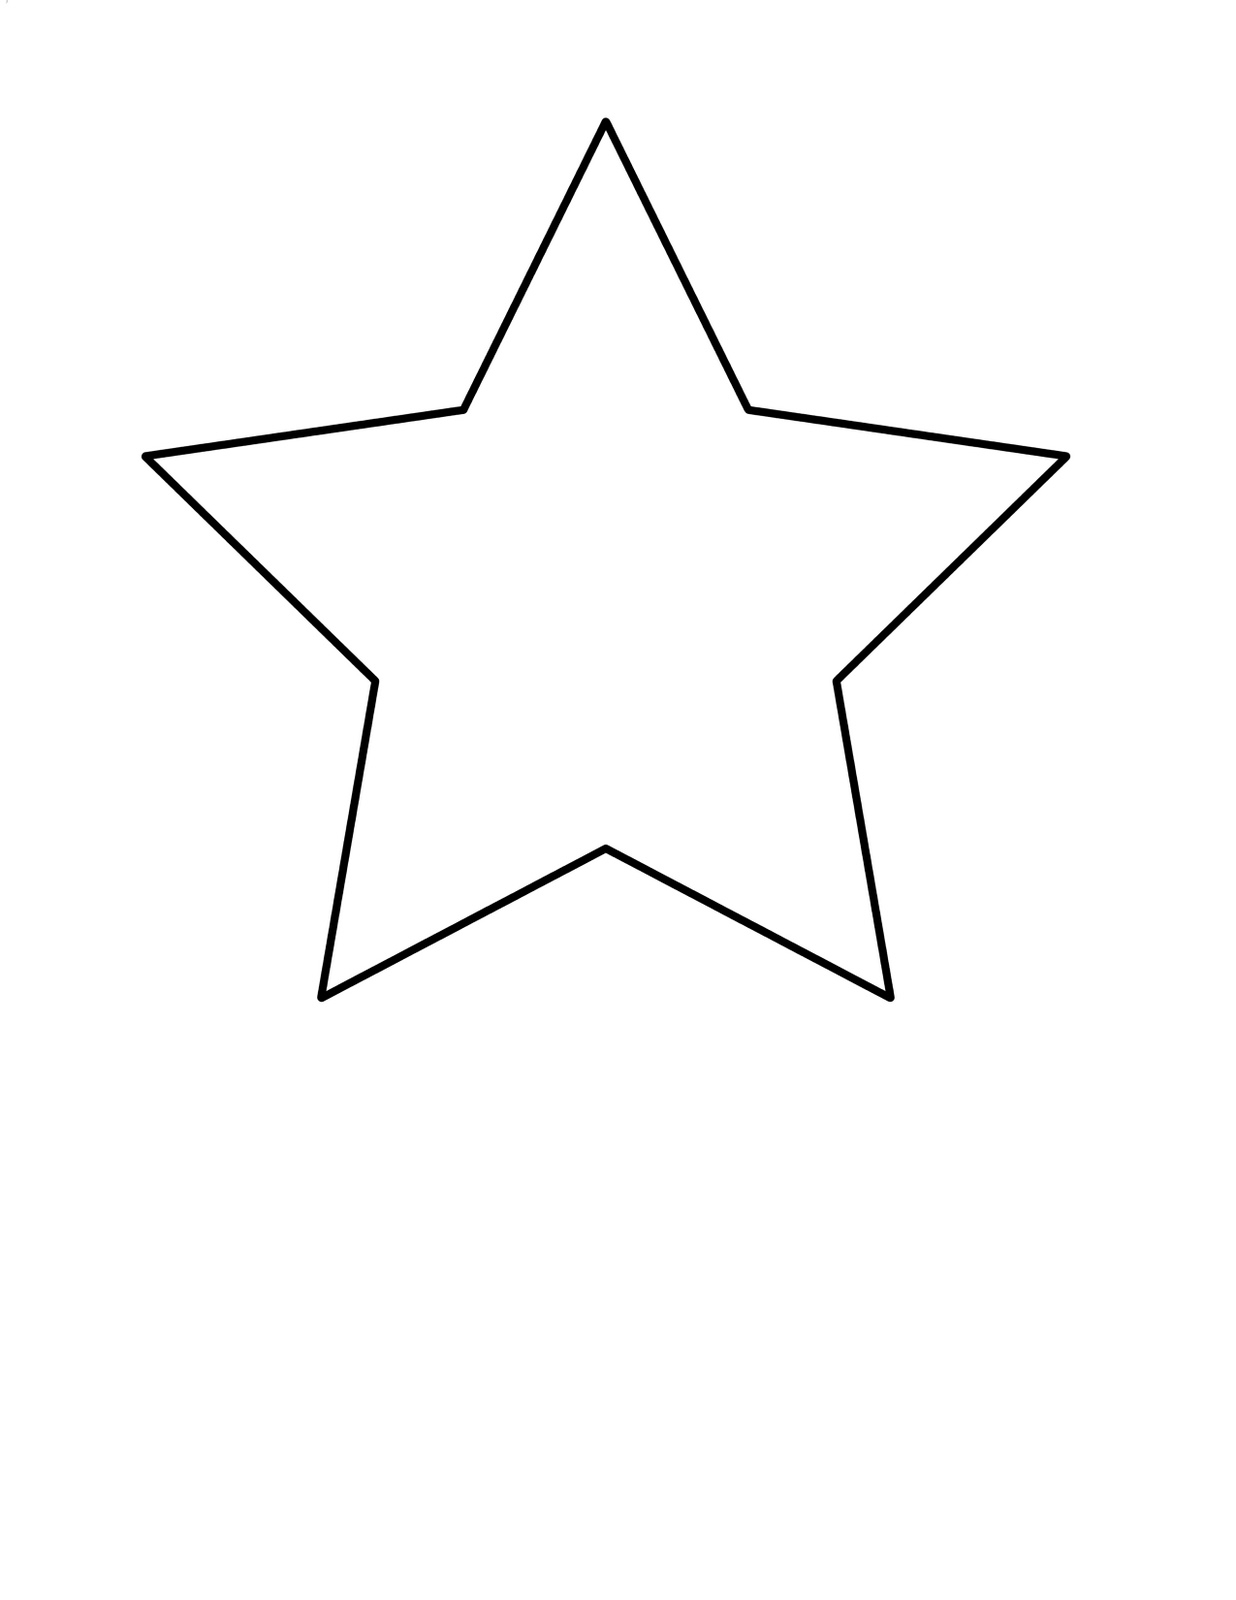 24 Outline Of A Star Shape Free Cliparts That You Can Download To You